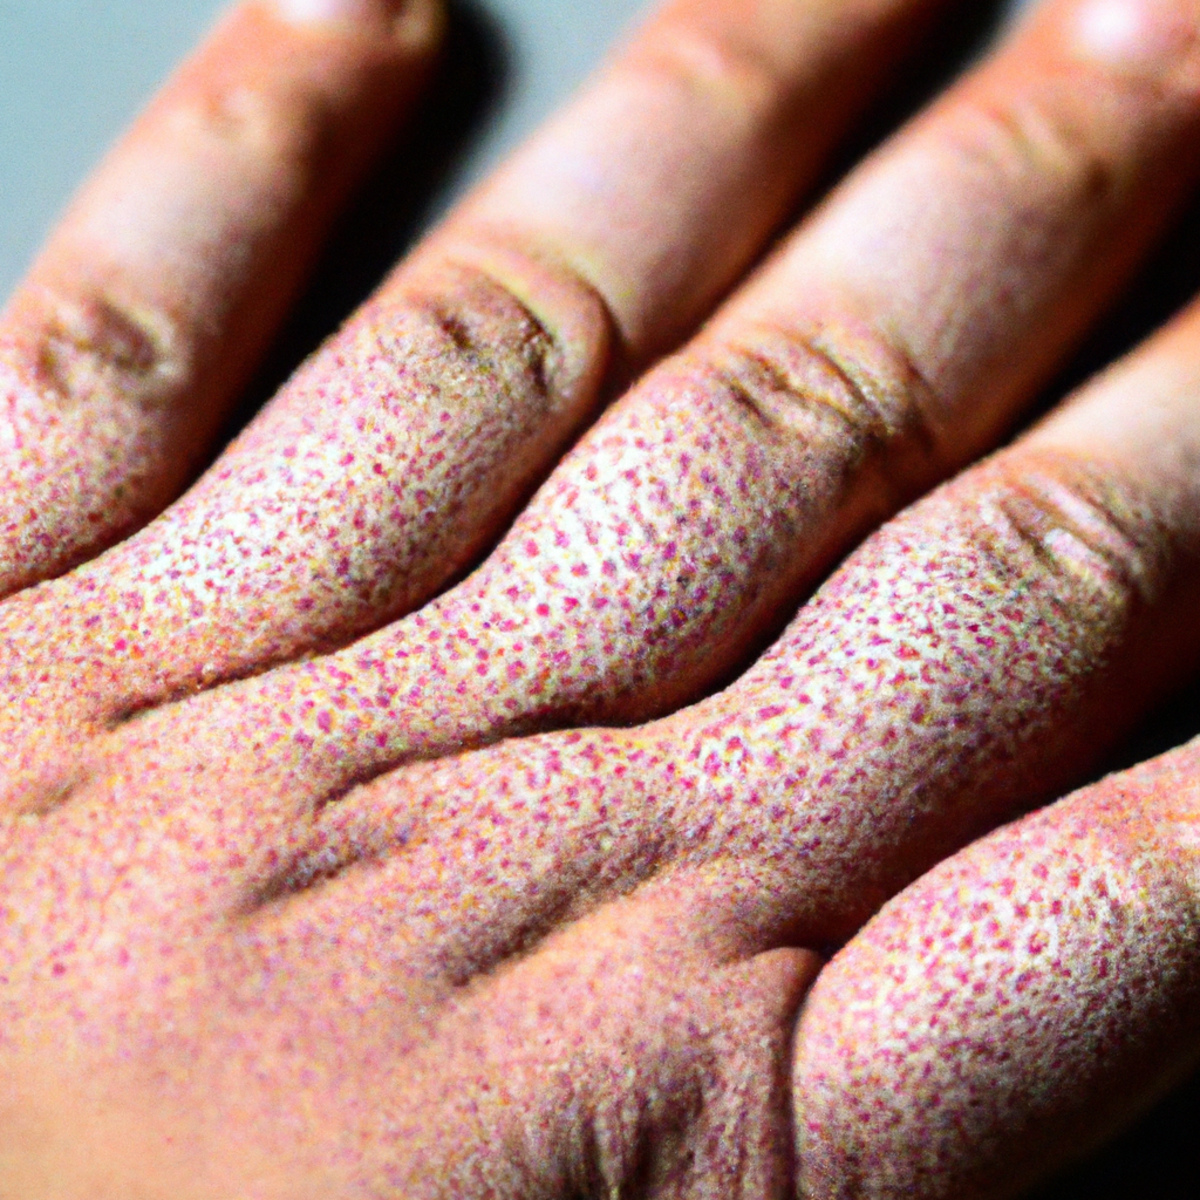 Close-up of hand with thick, dry, scaly skin, showcasing the unique texture of Harlequin Ichthyosis.